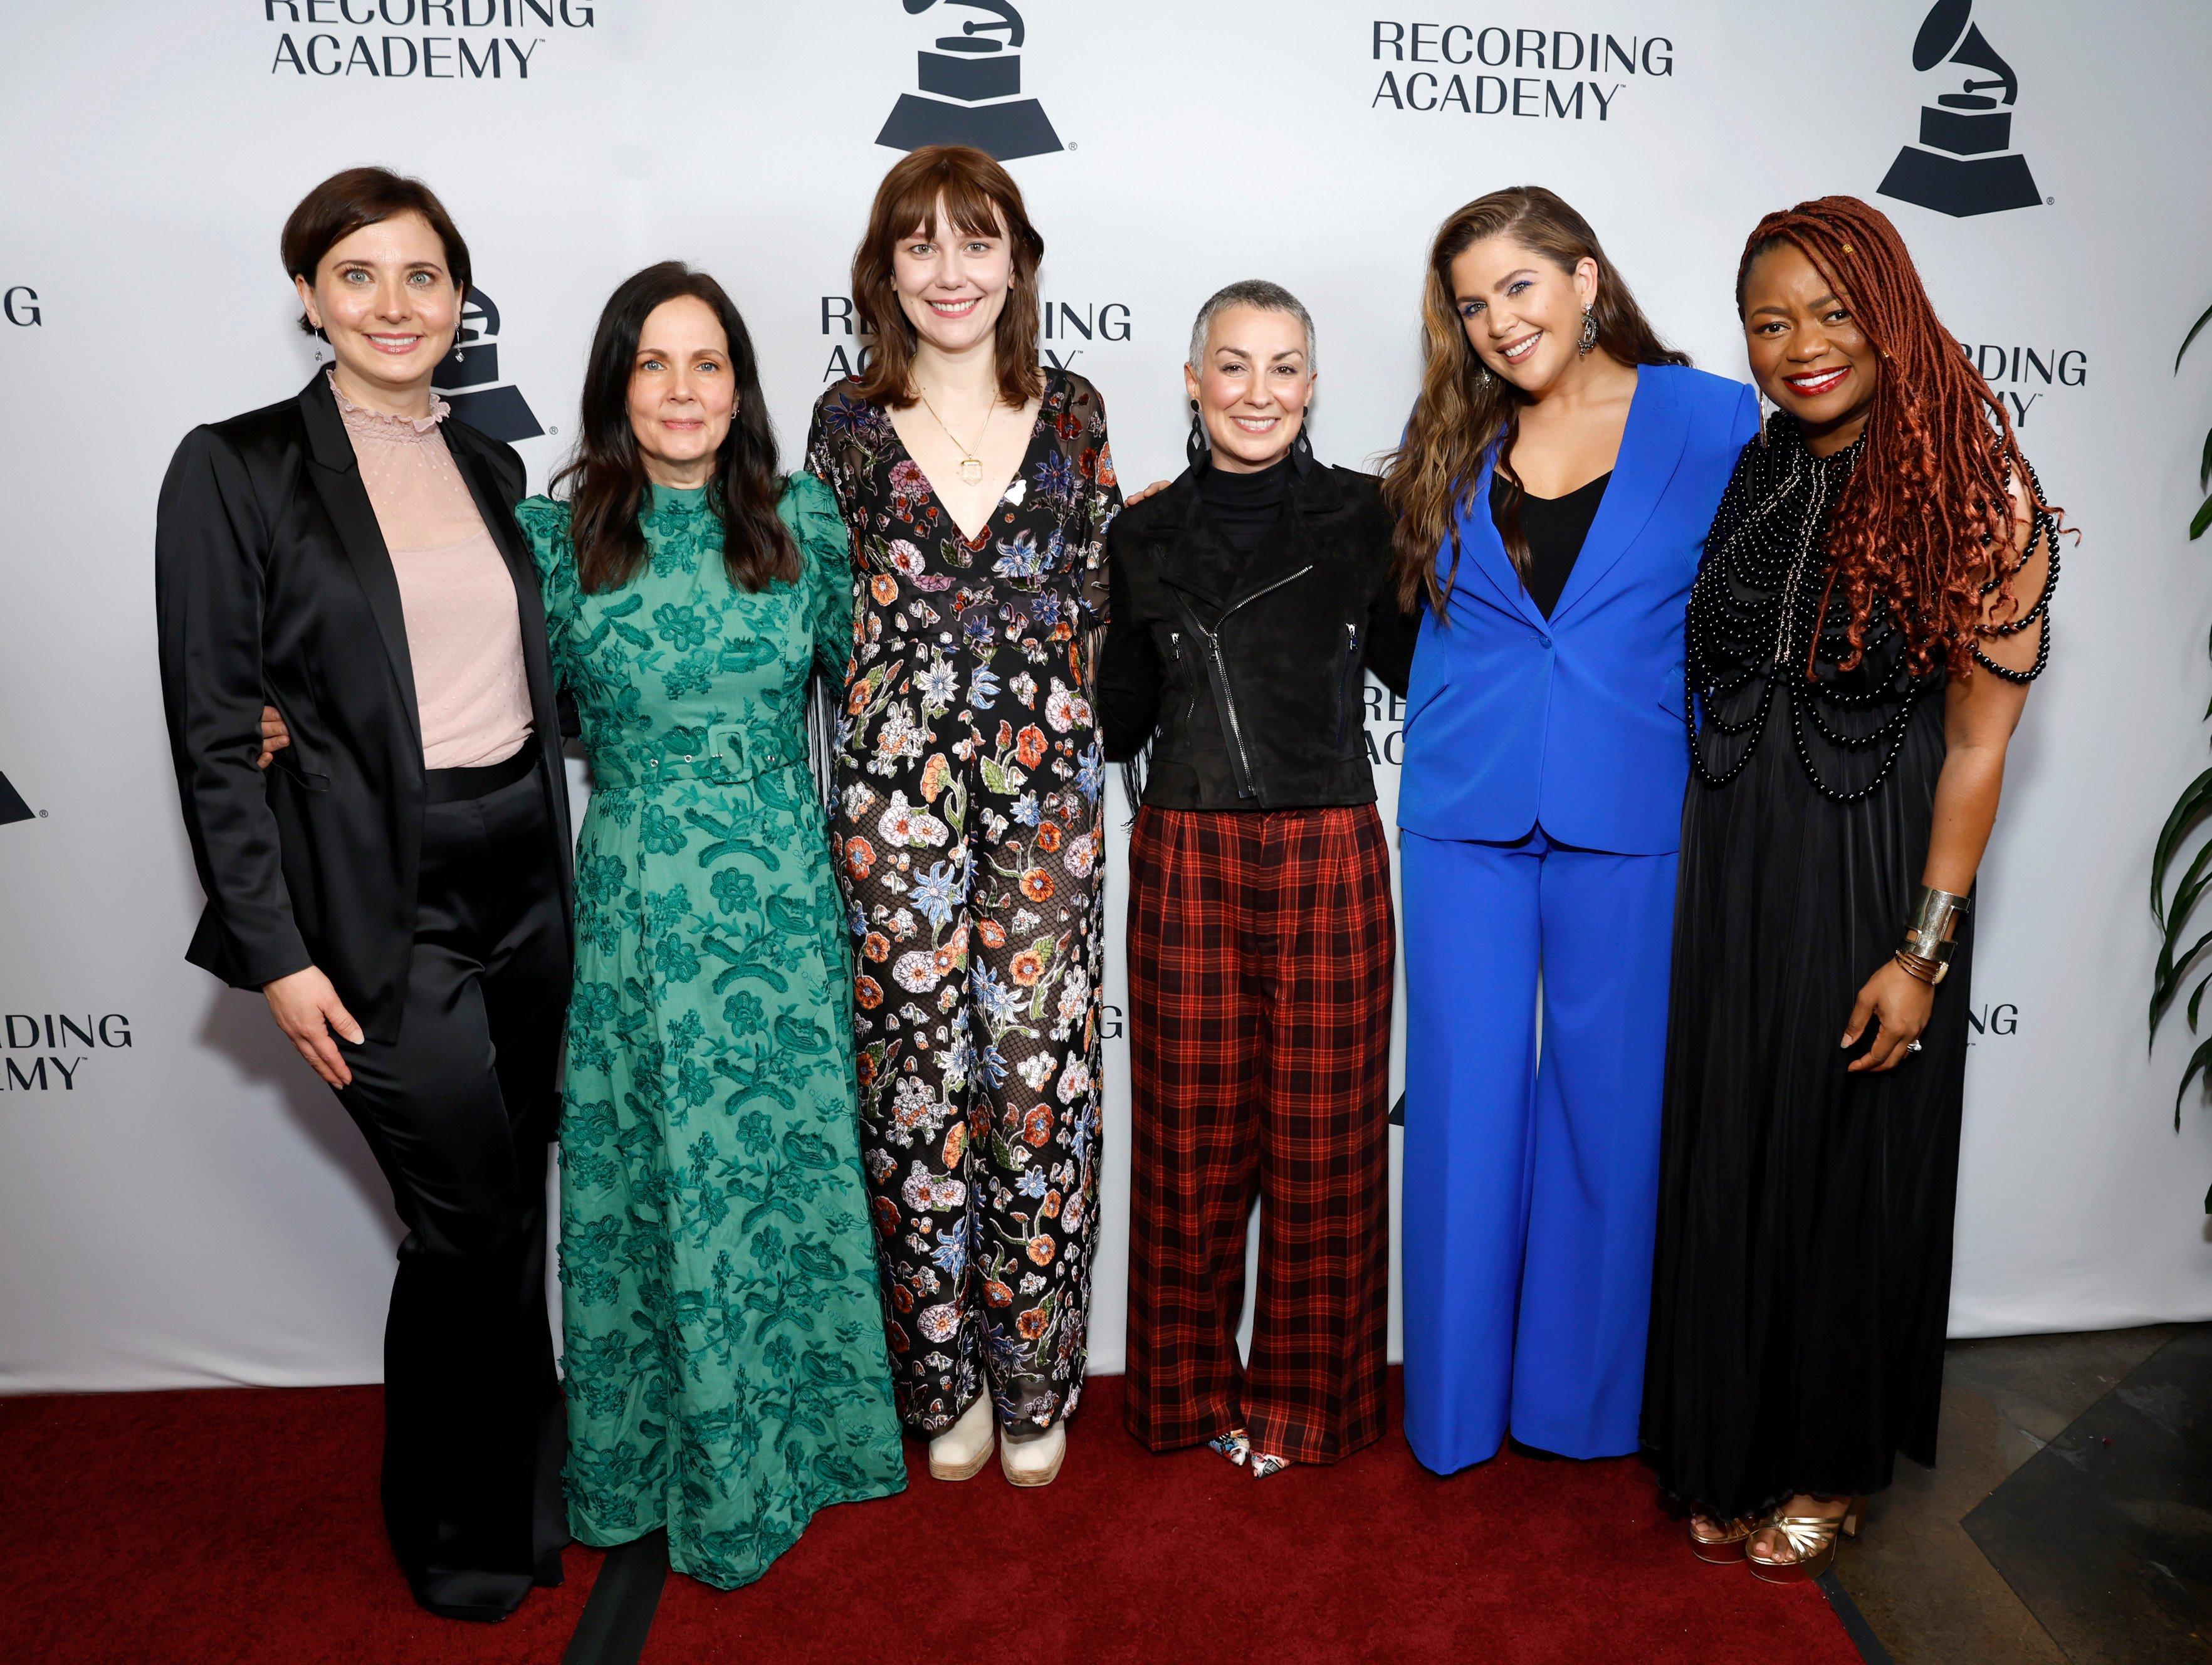 A Look Inside The 2023 Recording Academy Nashville Chapter Nominee Celebration, A Tribute To Its Supportive Musical Community GRAMMY picture